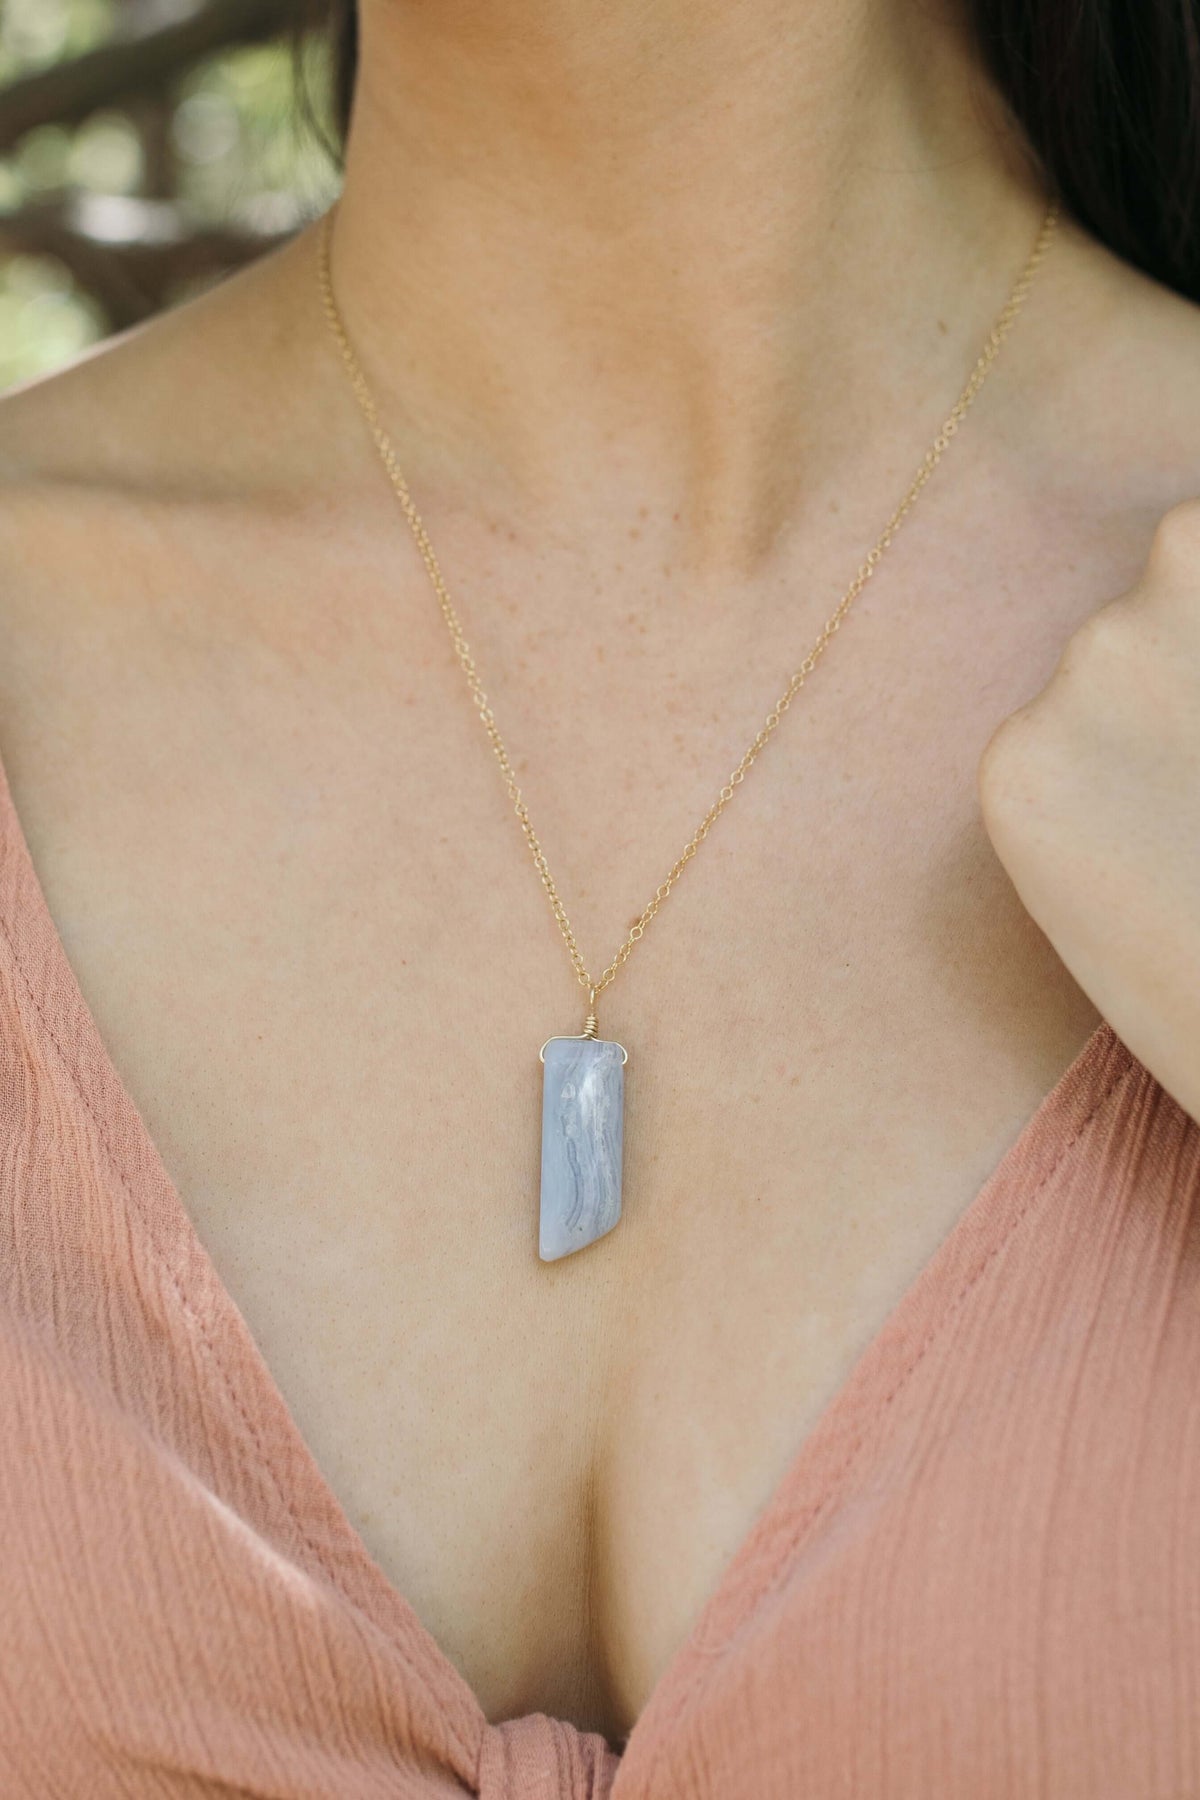 Smooth Point Pendant Necklace - Blue Lace Agate - 14K Gold Fill - Luna Tide Handmade Jewellery